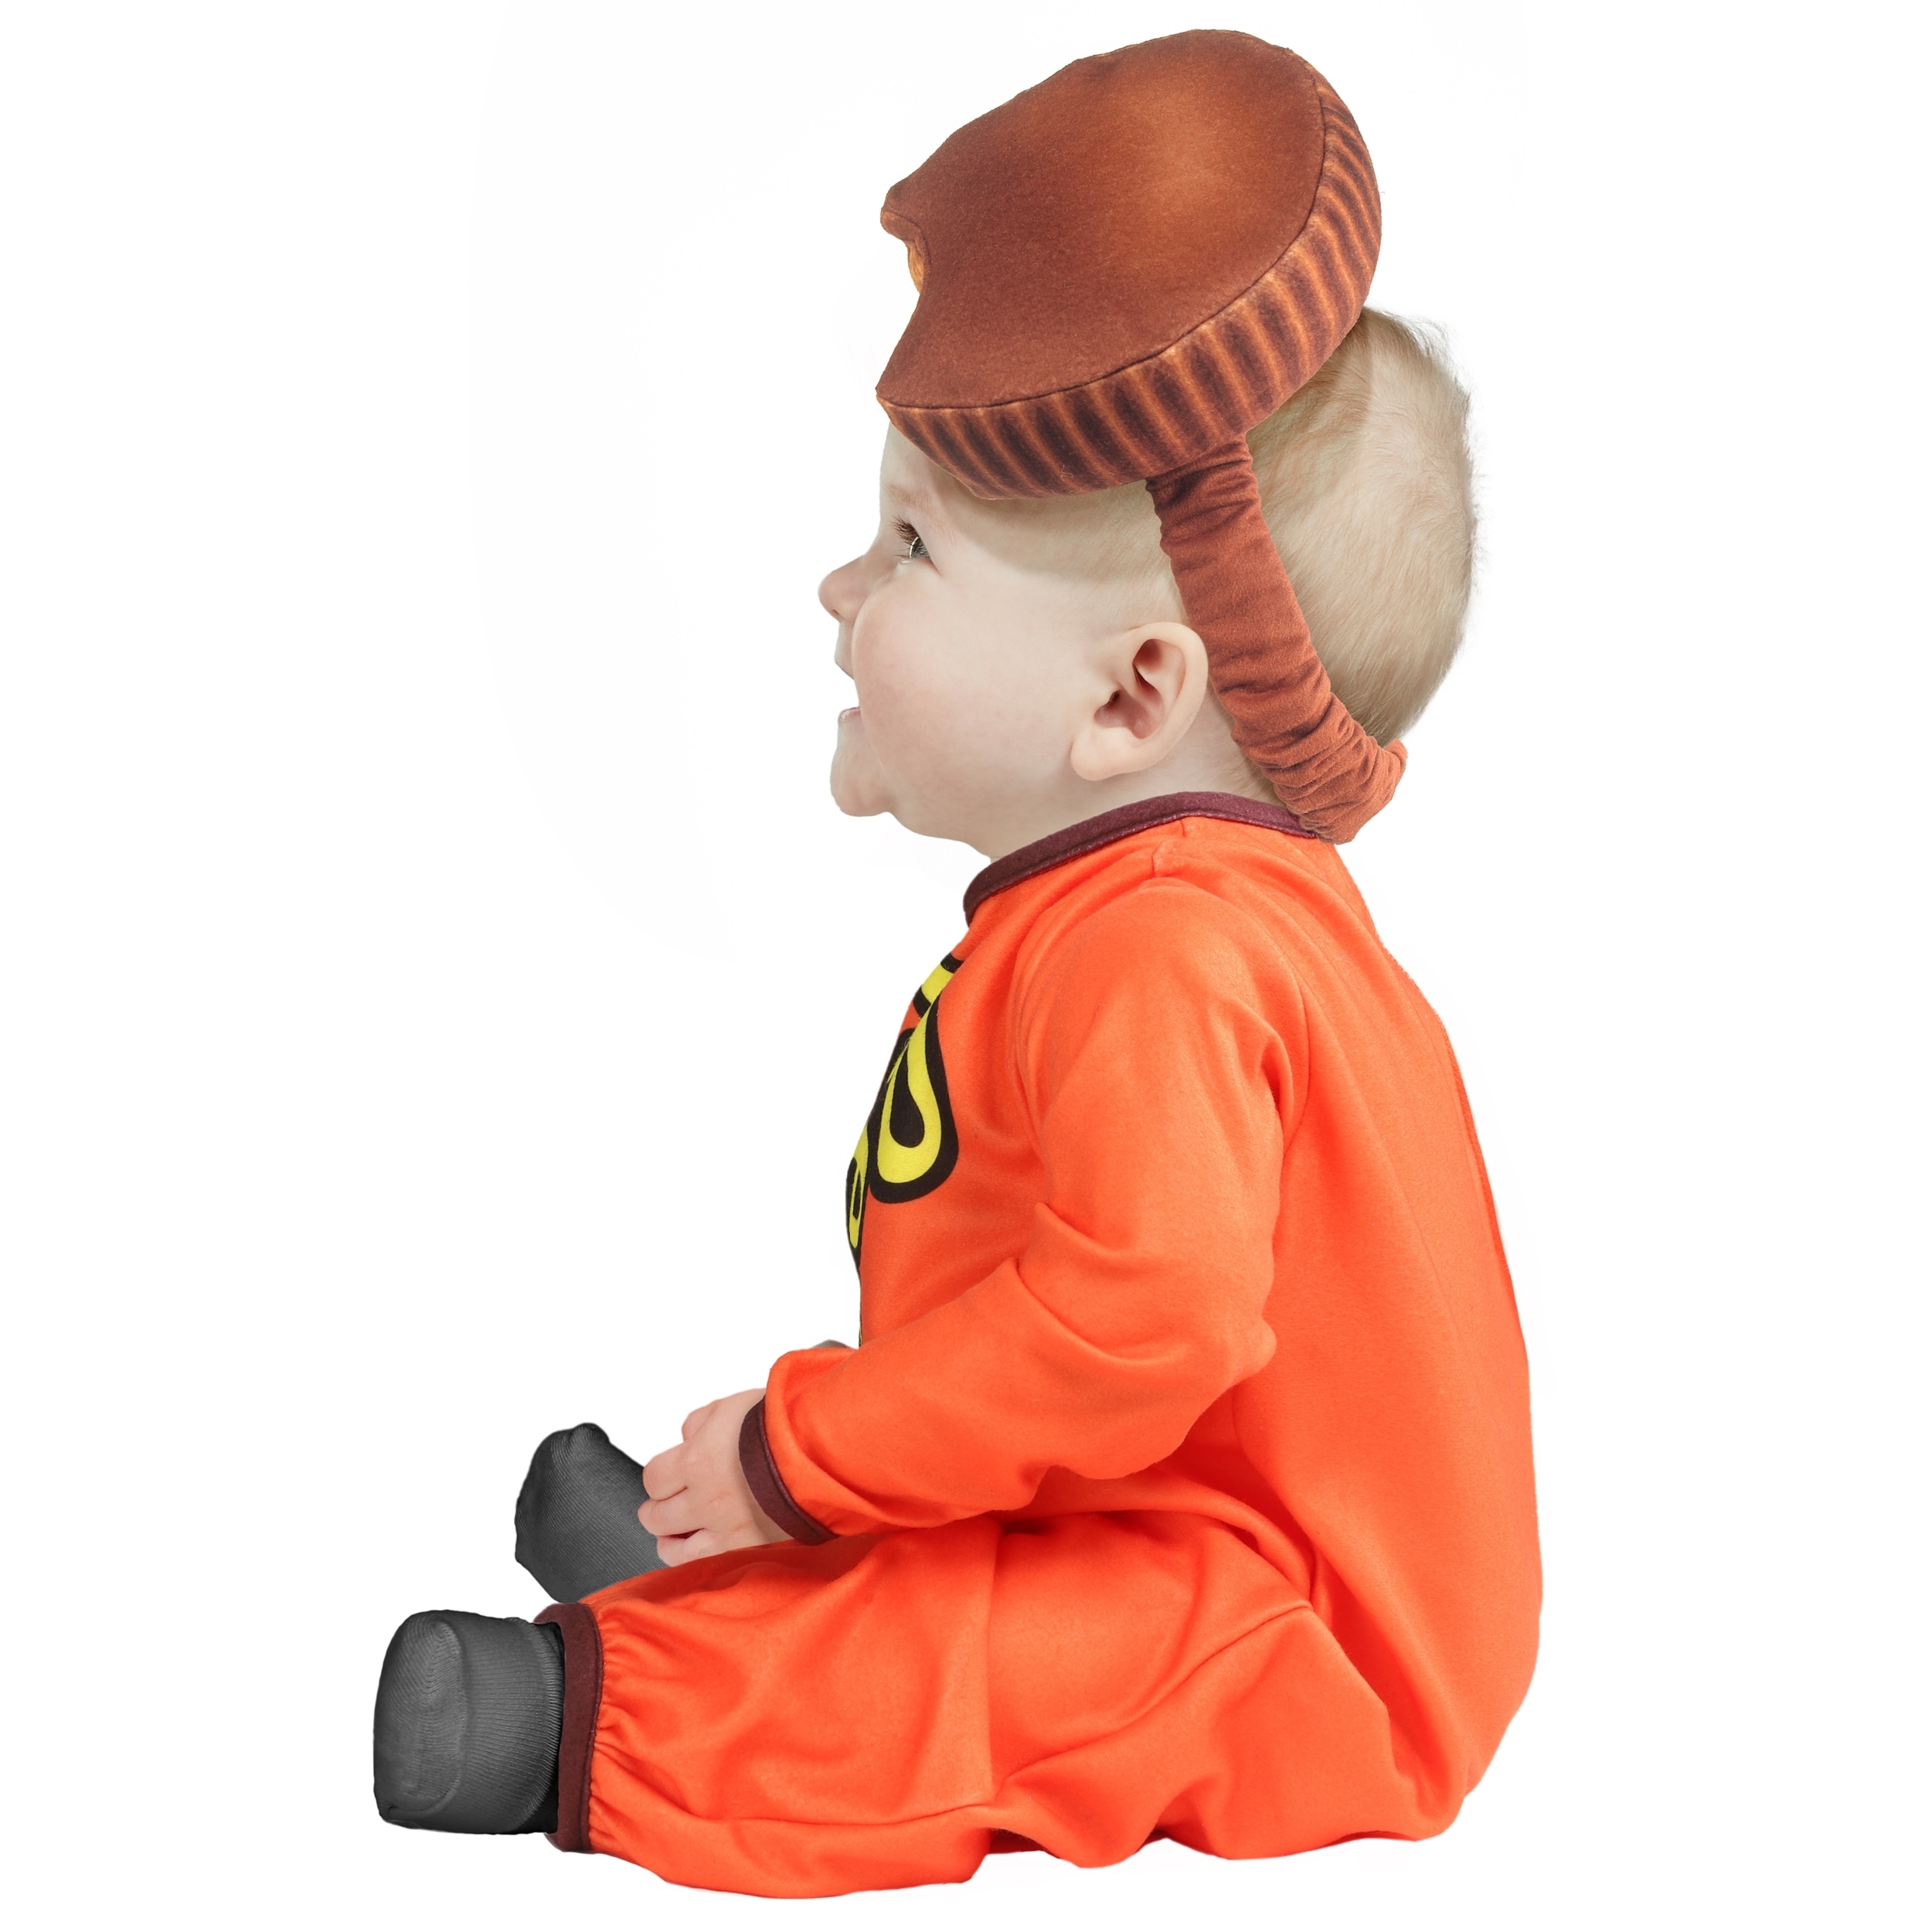 Rubie's Costumes Reese's Peanut Butter Cup Infant/Toddler Costume in ...